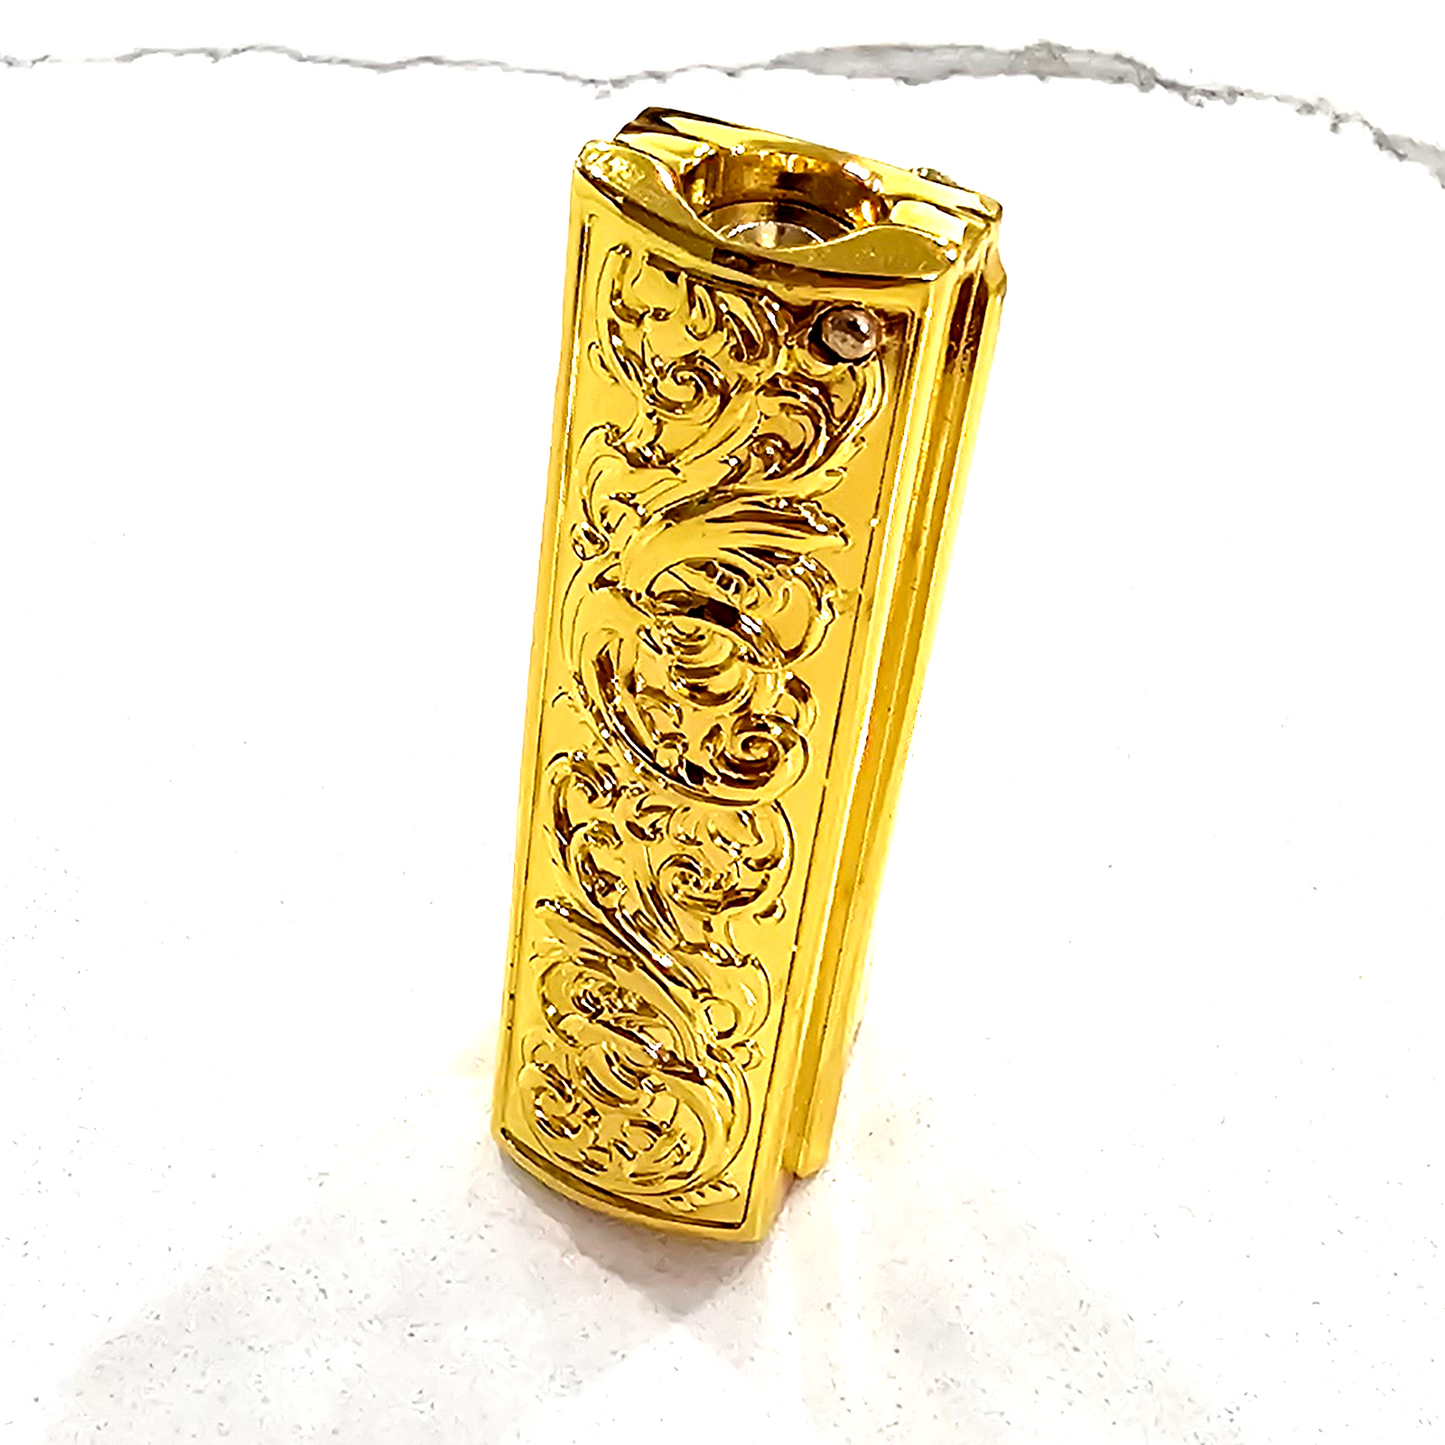 Engraved 1911 Mainspring, Grip Safety, Barrel Bushing, Recoil Spring Plug fit All 45ACP 9mm 1911s 24K Gold Plated